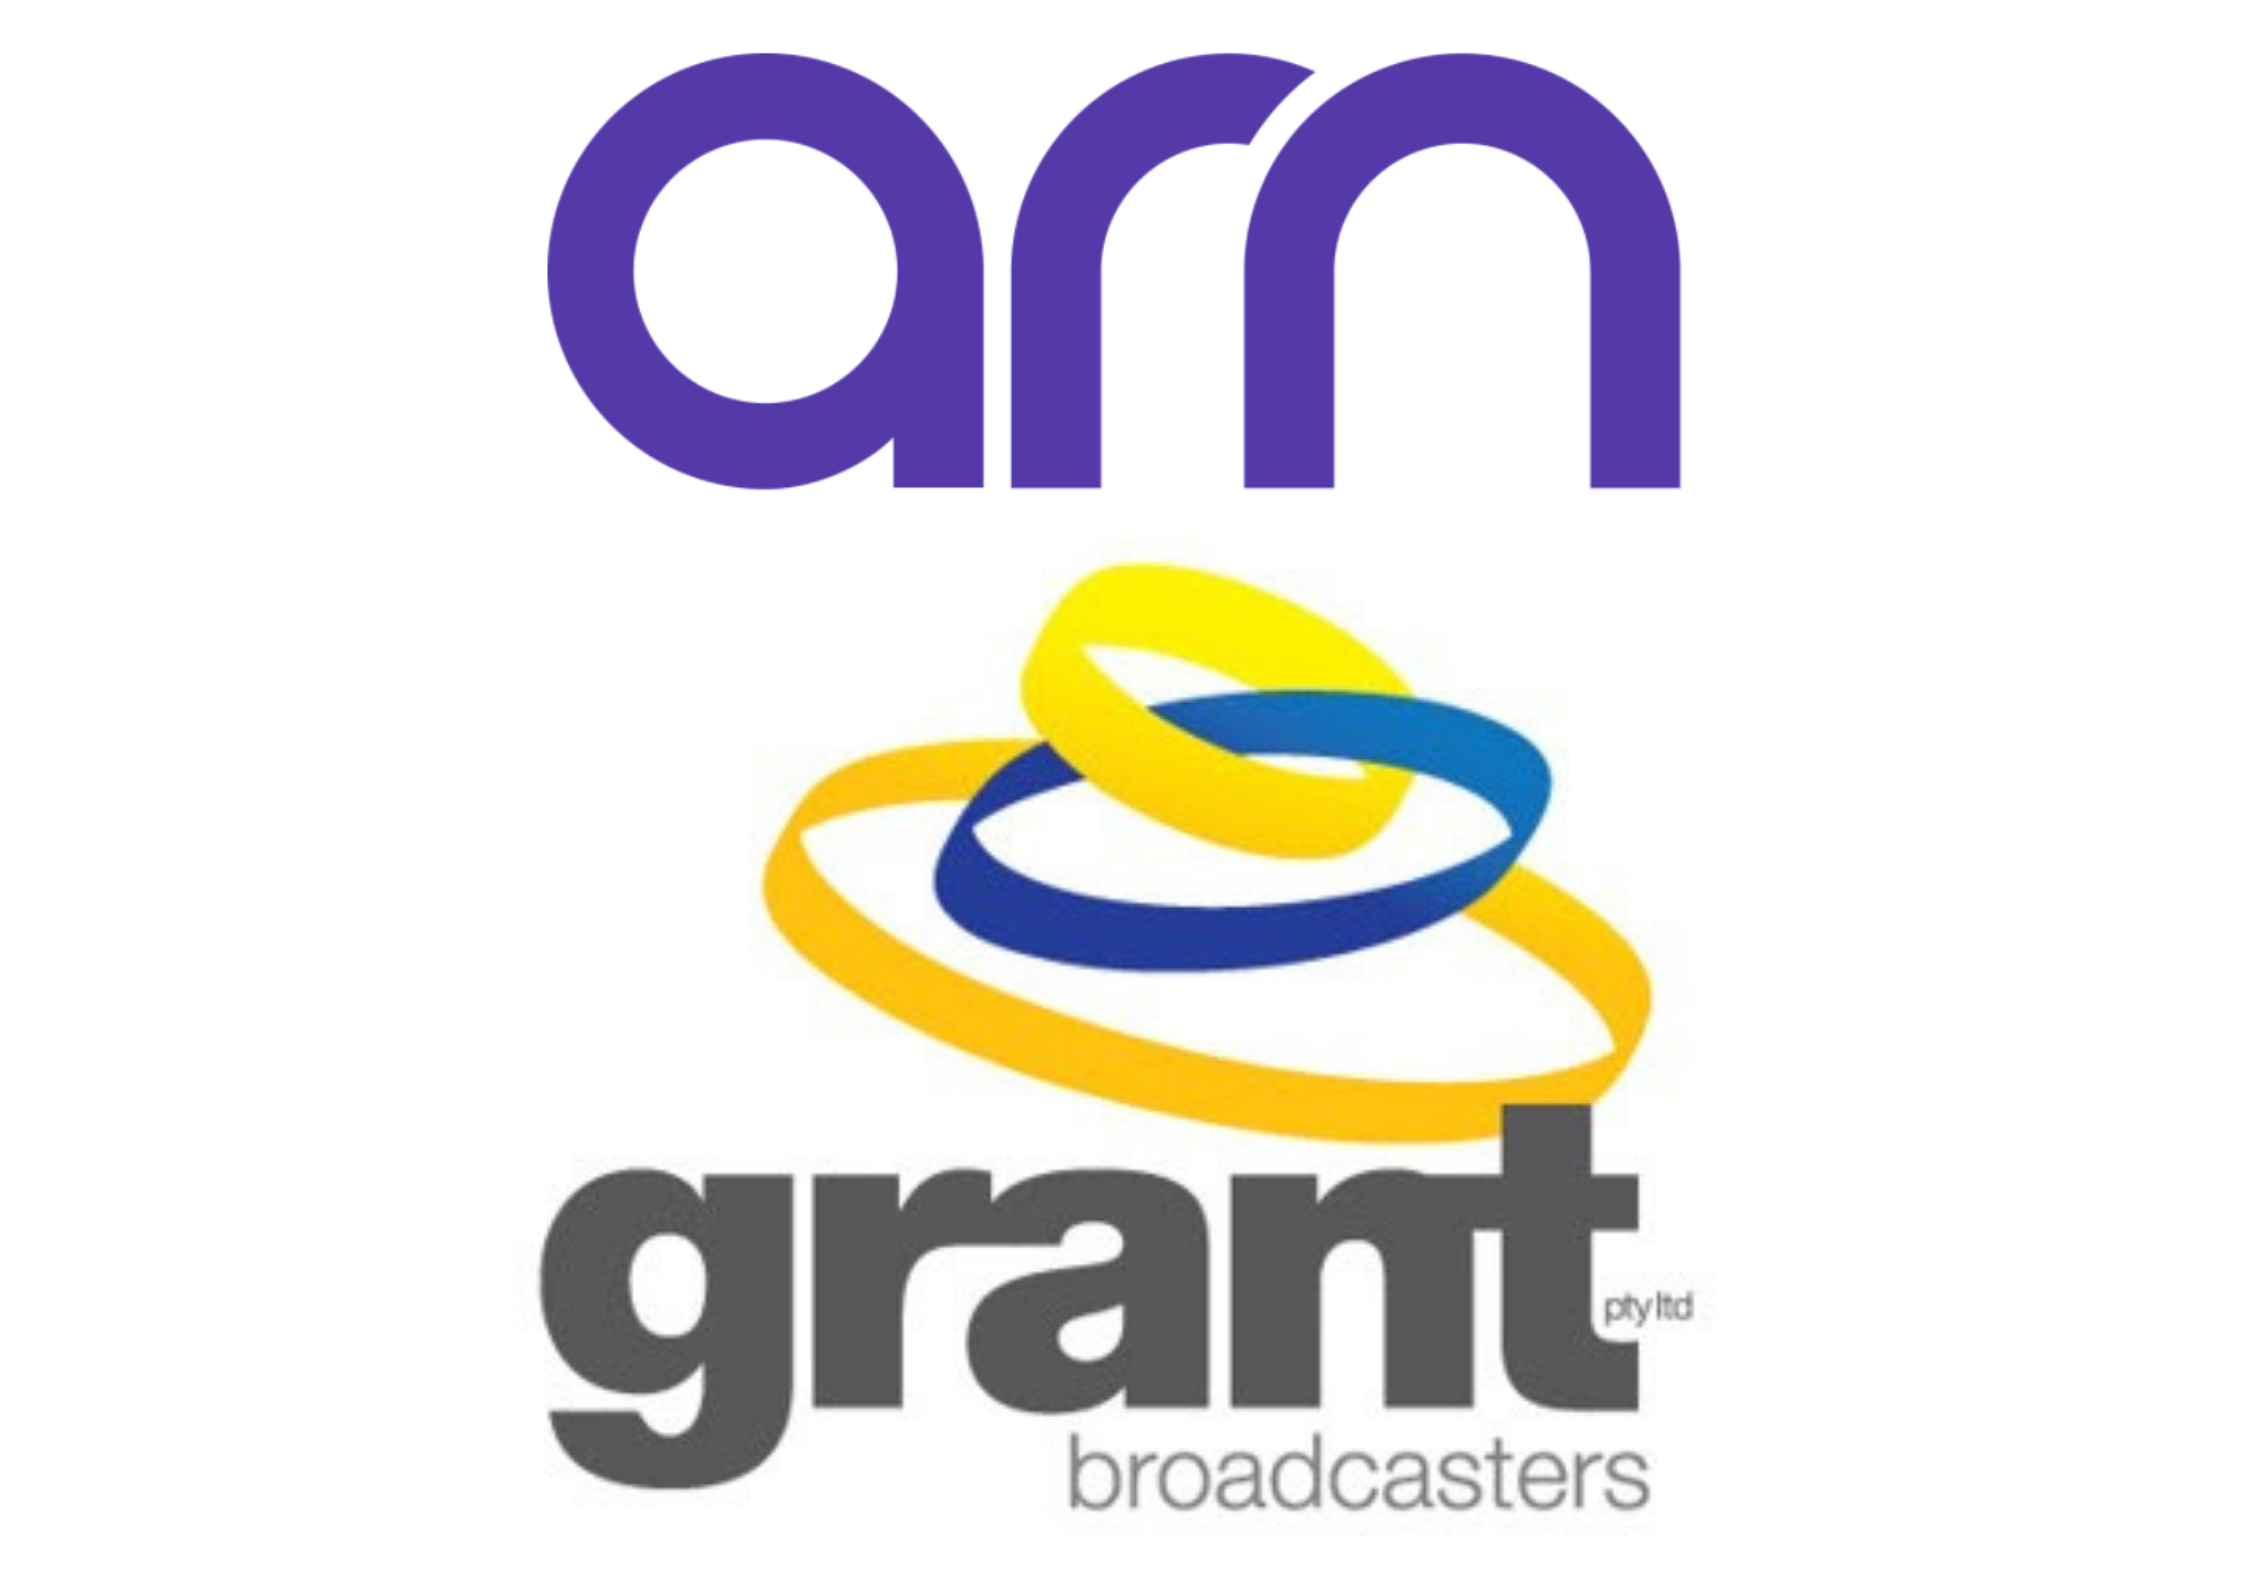 ARN and Grant Broadcasters logos